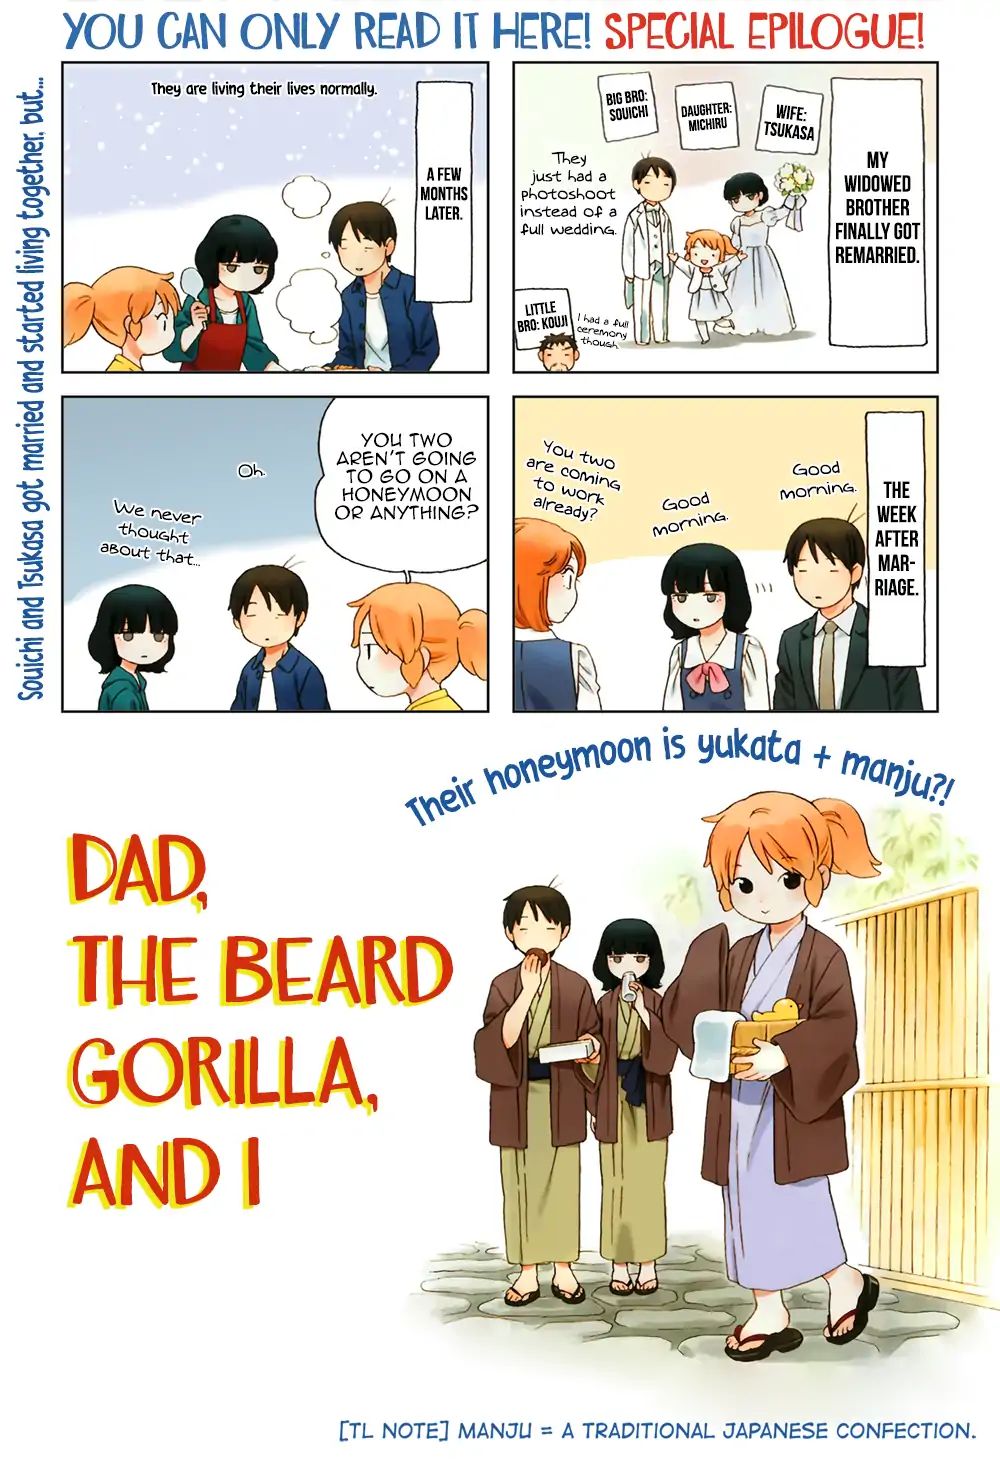 Dad, The Beard Gorilla And I - Page 3